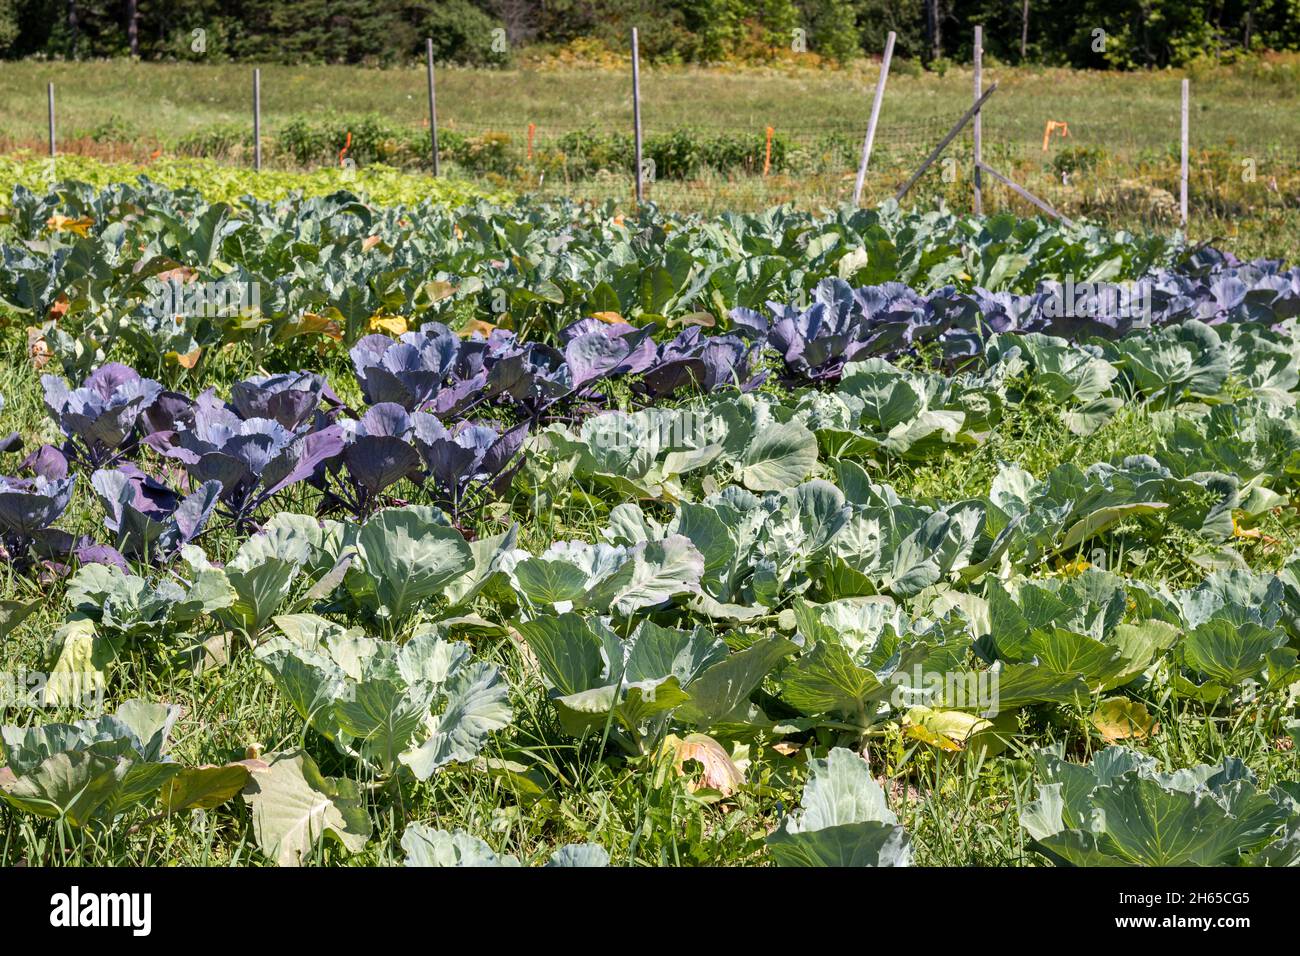 Rows of green and purple cabbage in home garden. Cabbage patch Stock Photo